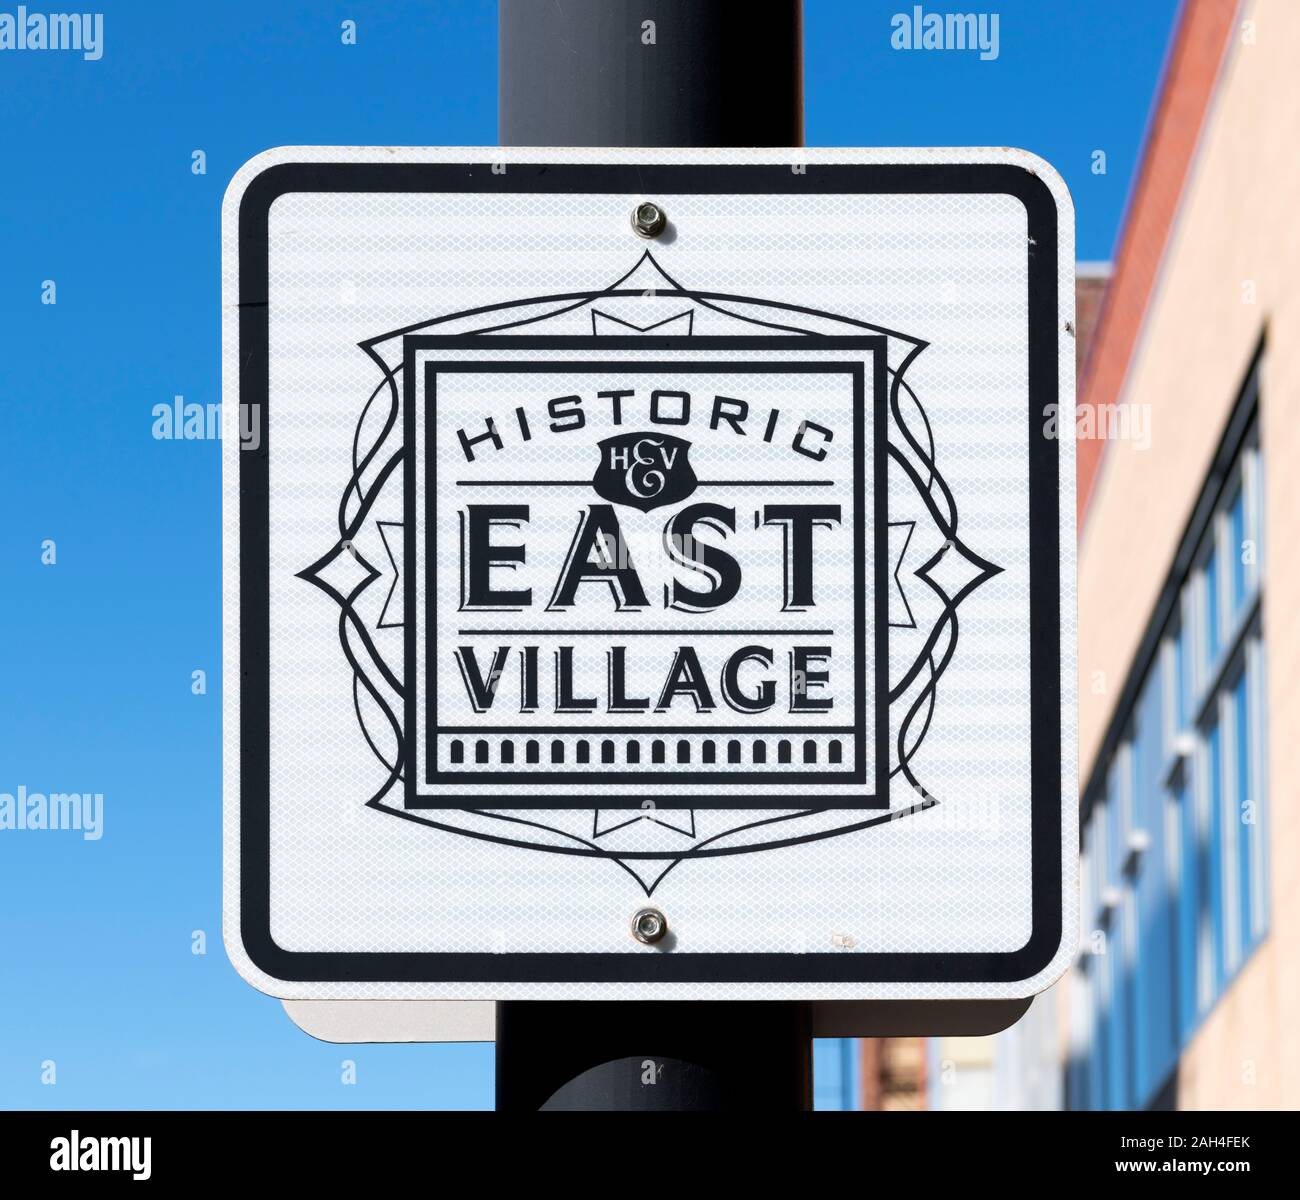 "Historic East Village" sign in downtown Des Moines, Iowa, USA. Stock Photo